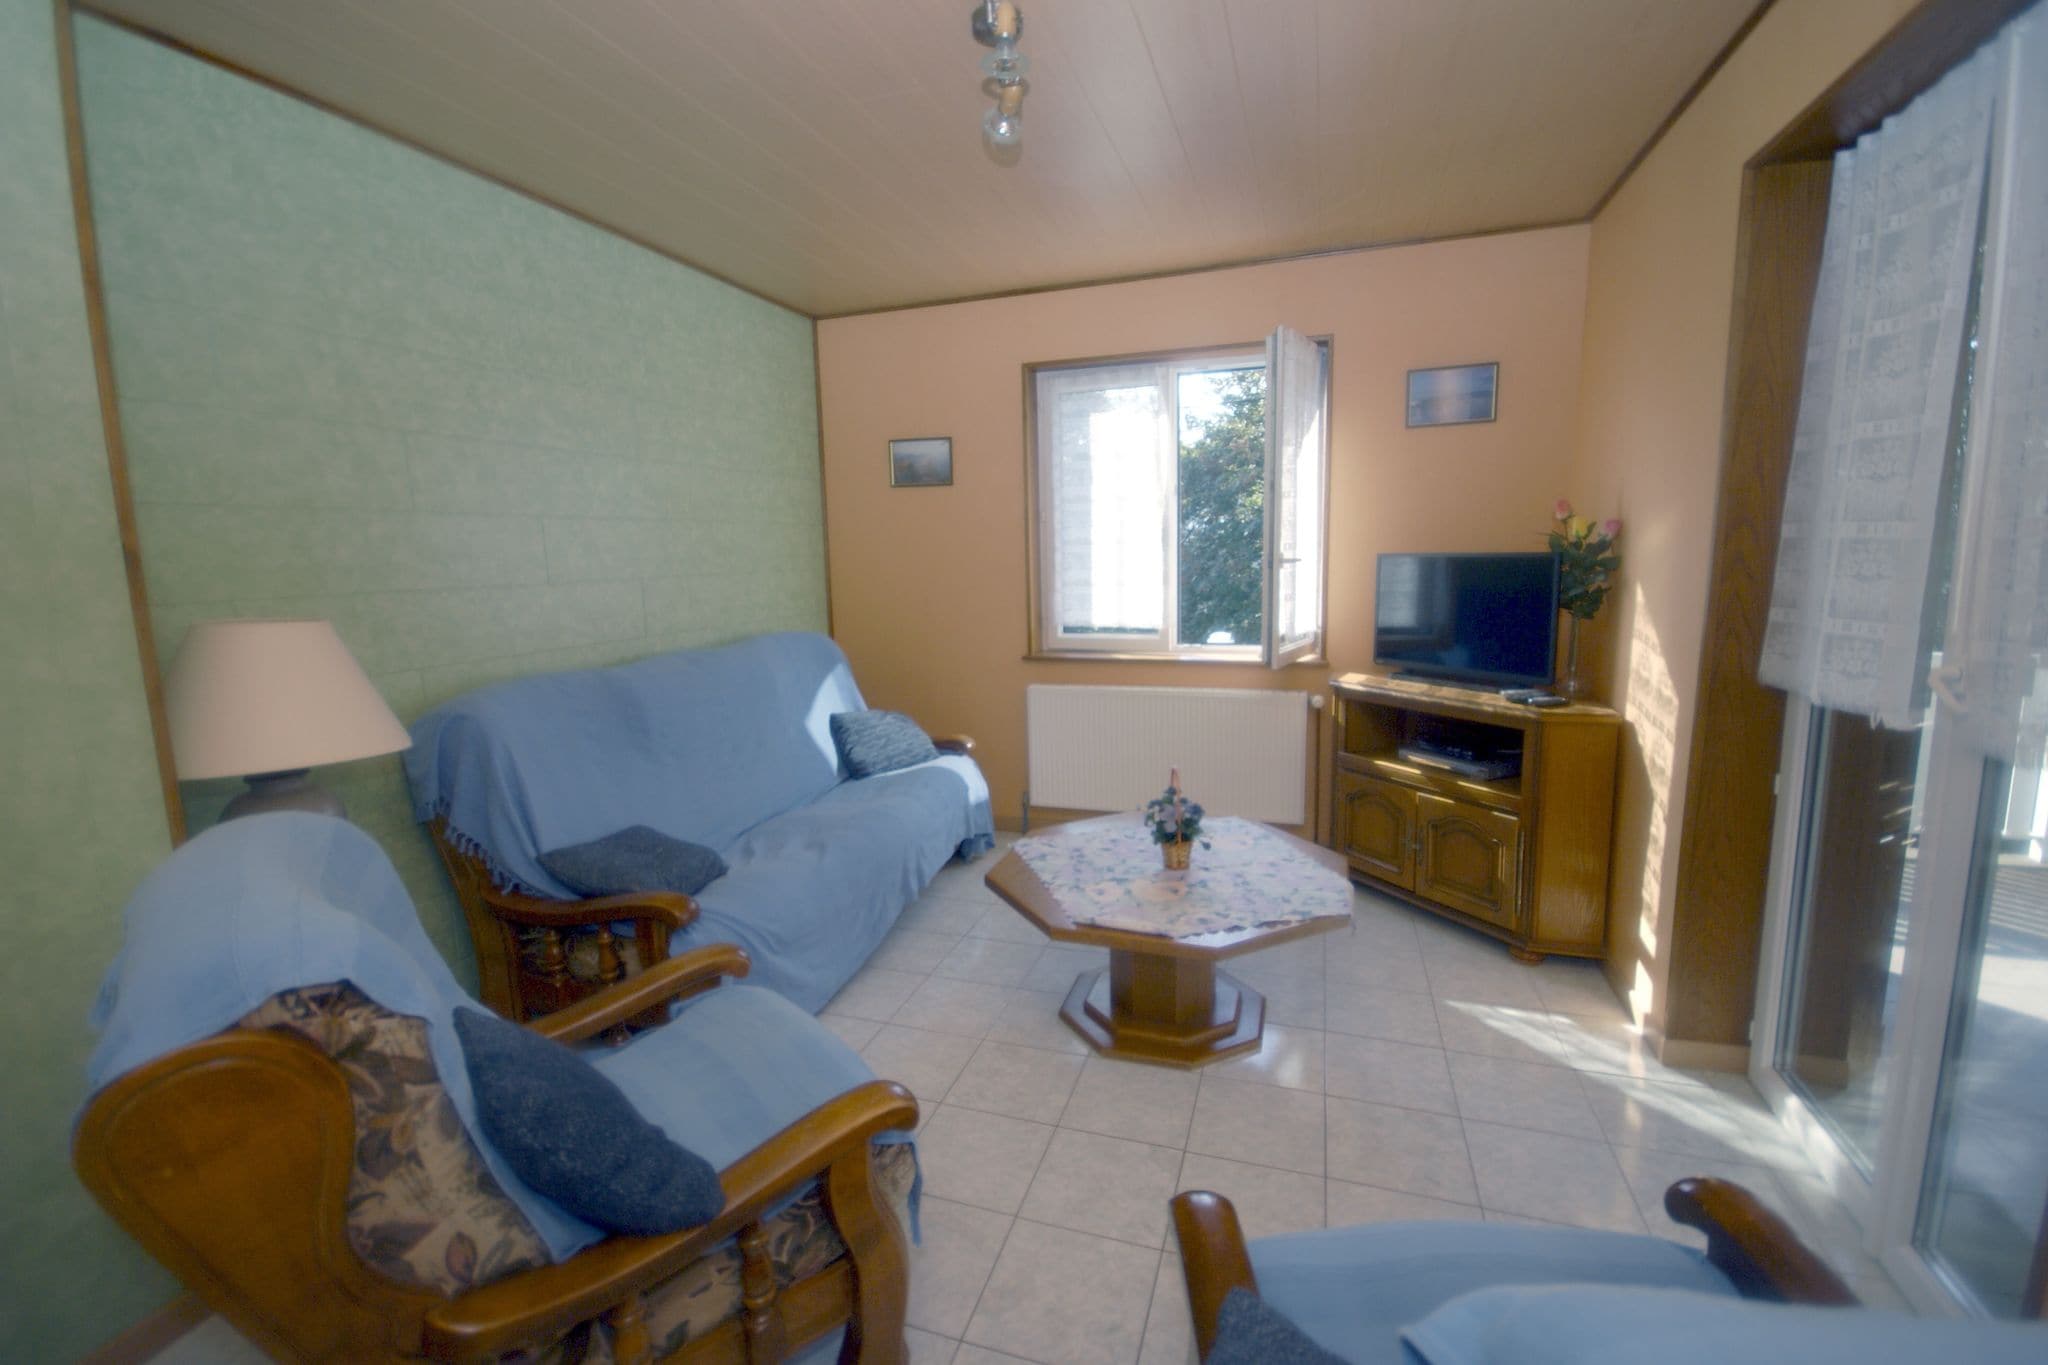 Holiday Home in Tabo with Garden, Terrace, Sun-loungers, BBQ